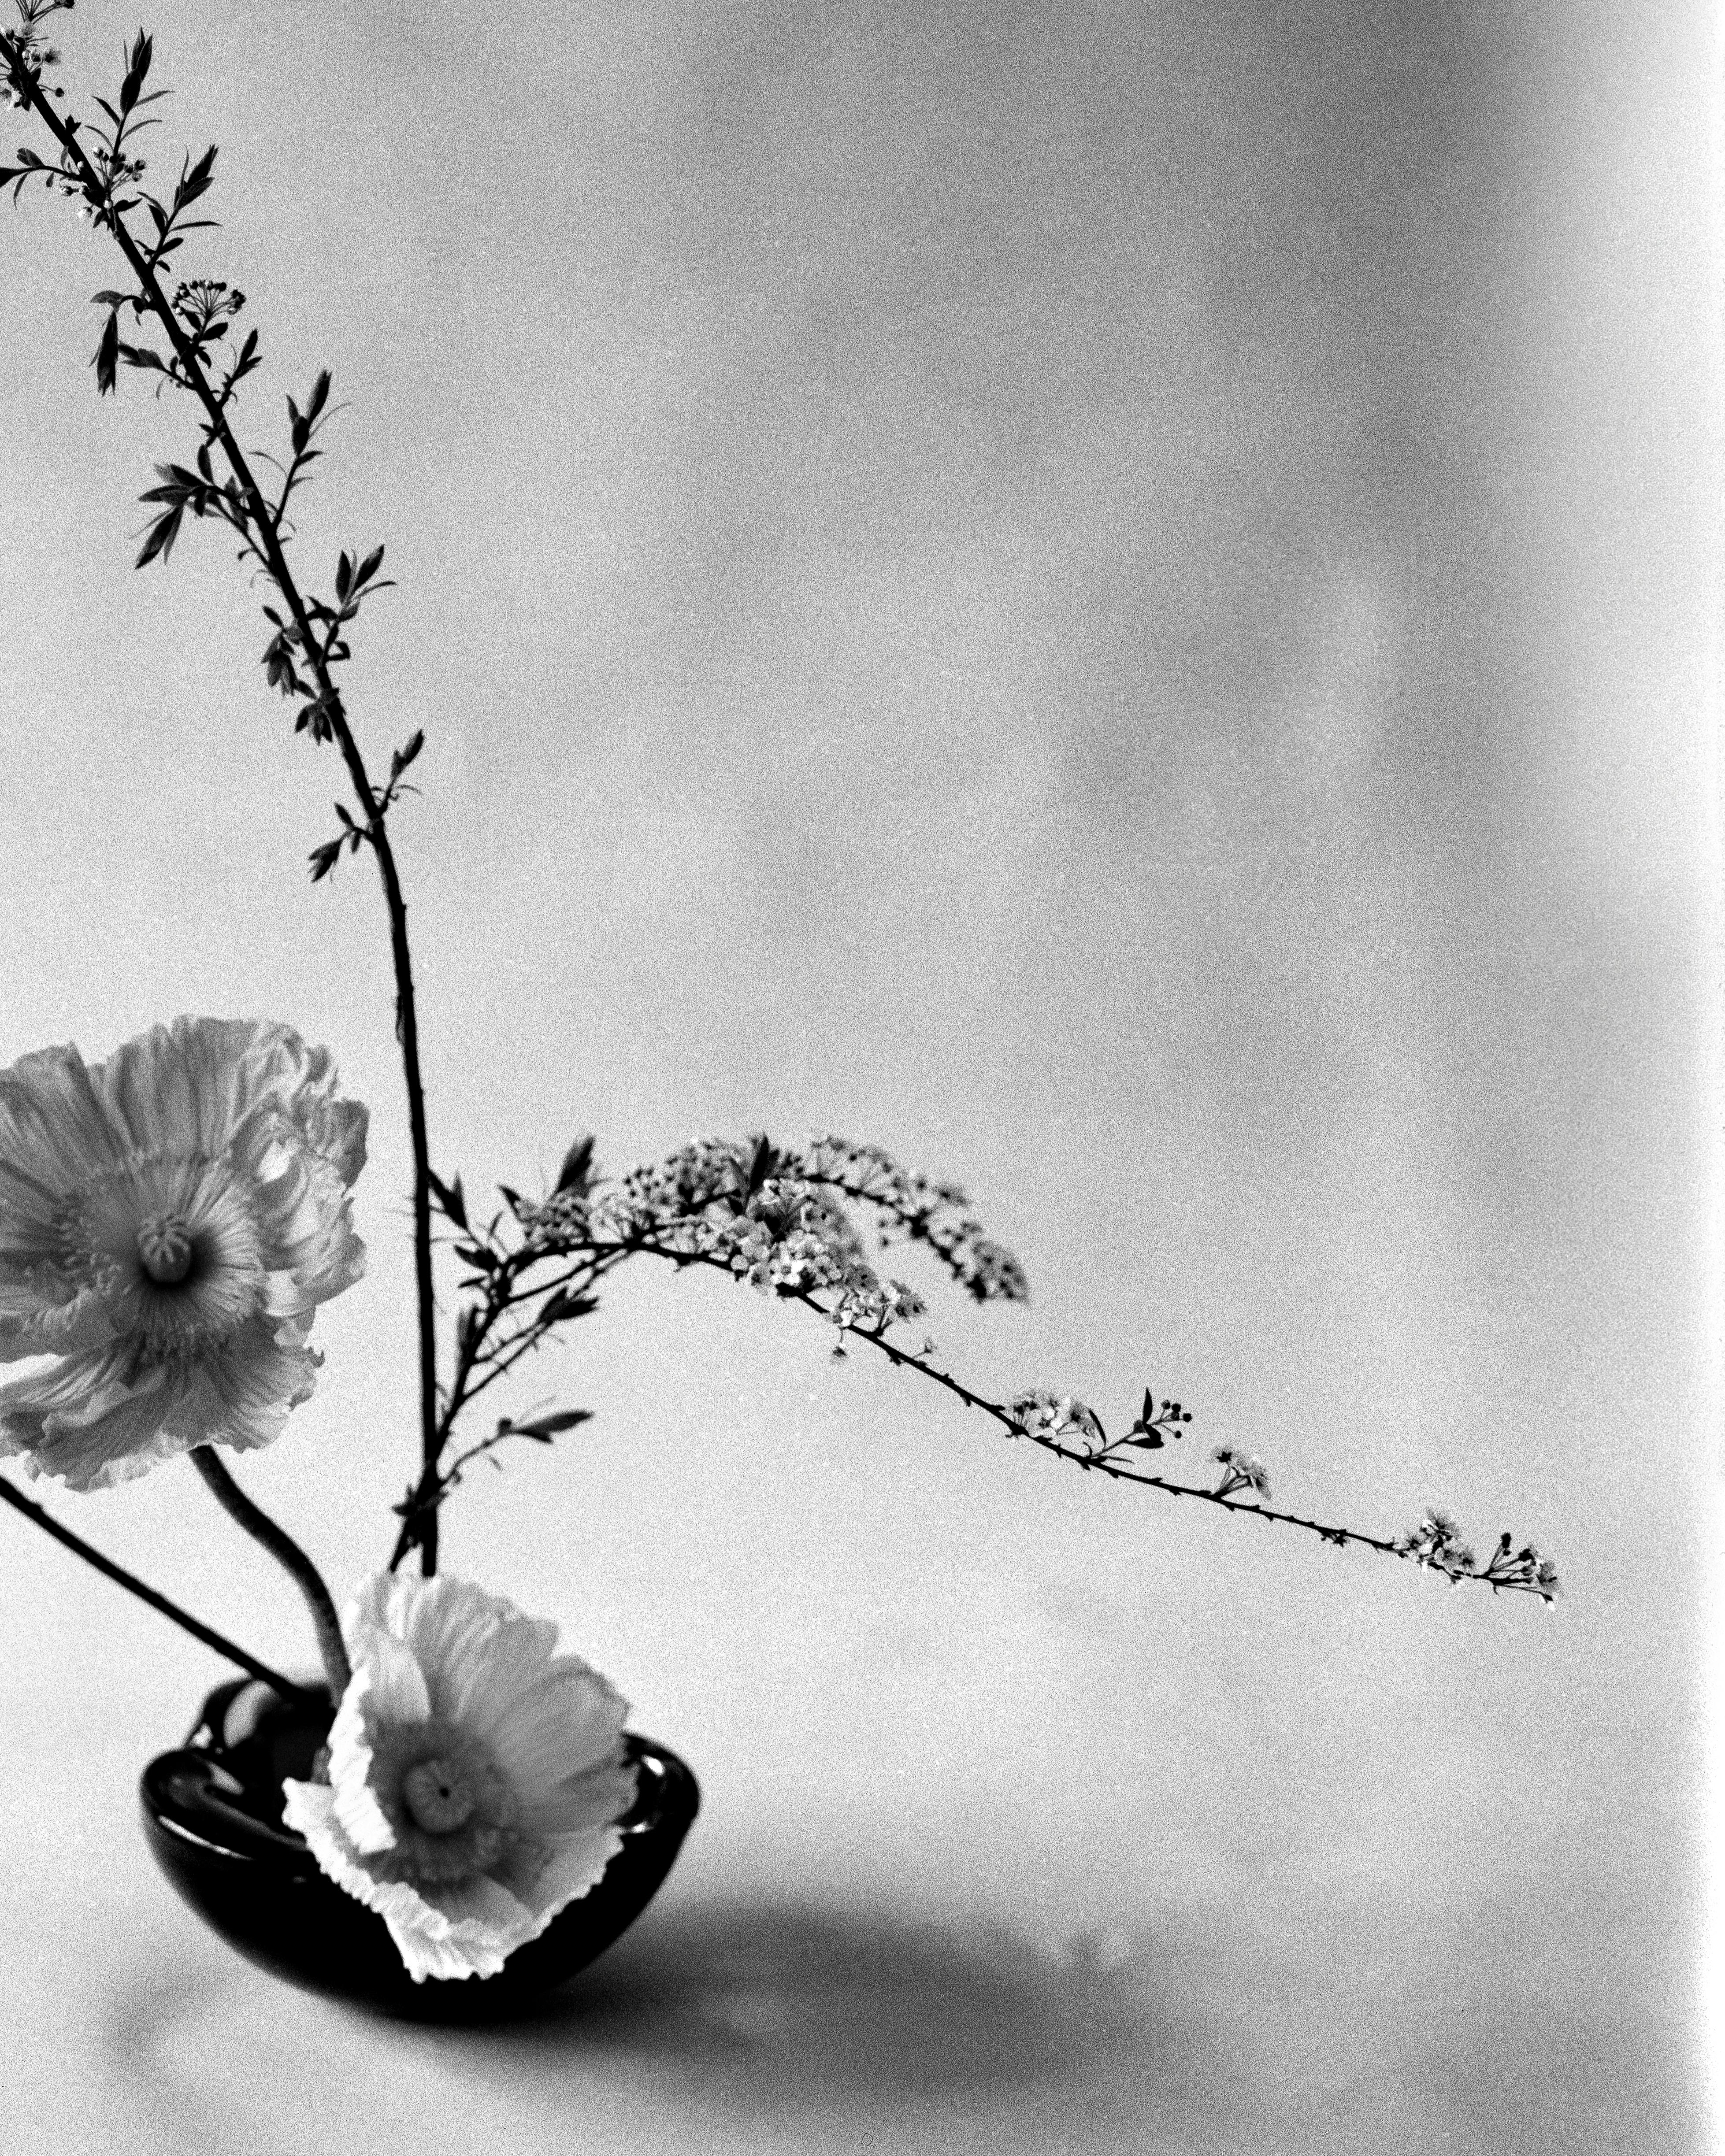 Ikebana - black and white flower arrangement, Limited edition of 10 - Contemporary Photograph by Ugne Pouwell